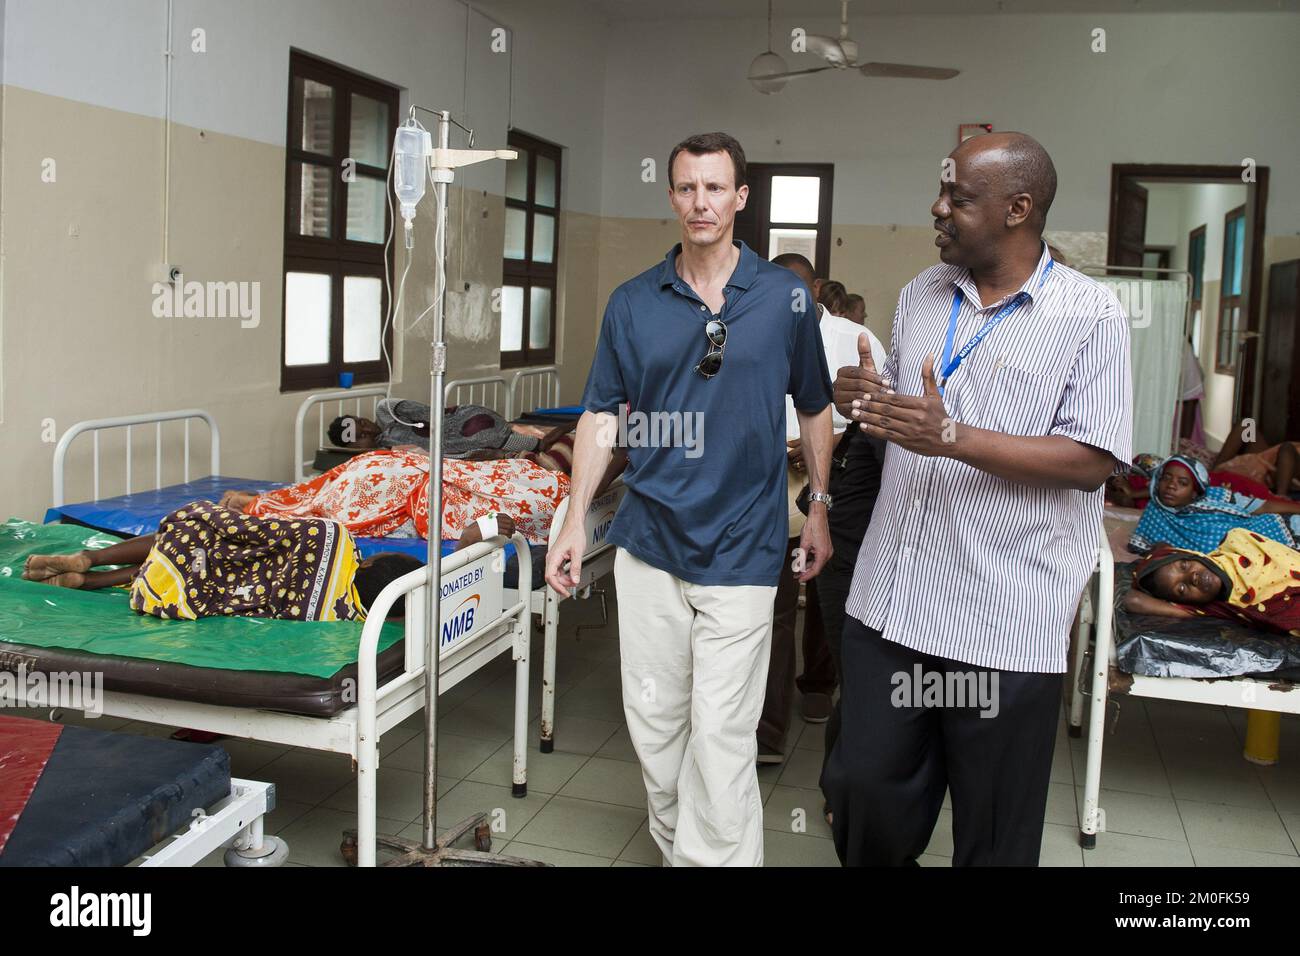 Prince Joachim and the Delegation of Care Denmark has come to Zanzibar where the Prince is visiting a Danida-supported hospital, Wednesday, September 5th. 2012. PHOTOGRAPHER KLAVS BO CHRISTENSEN / POLFOTO Stock Photo